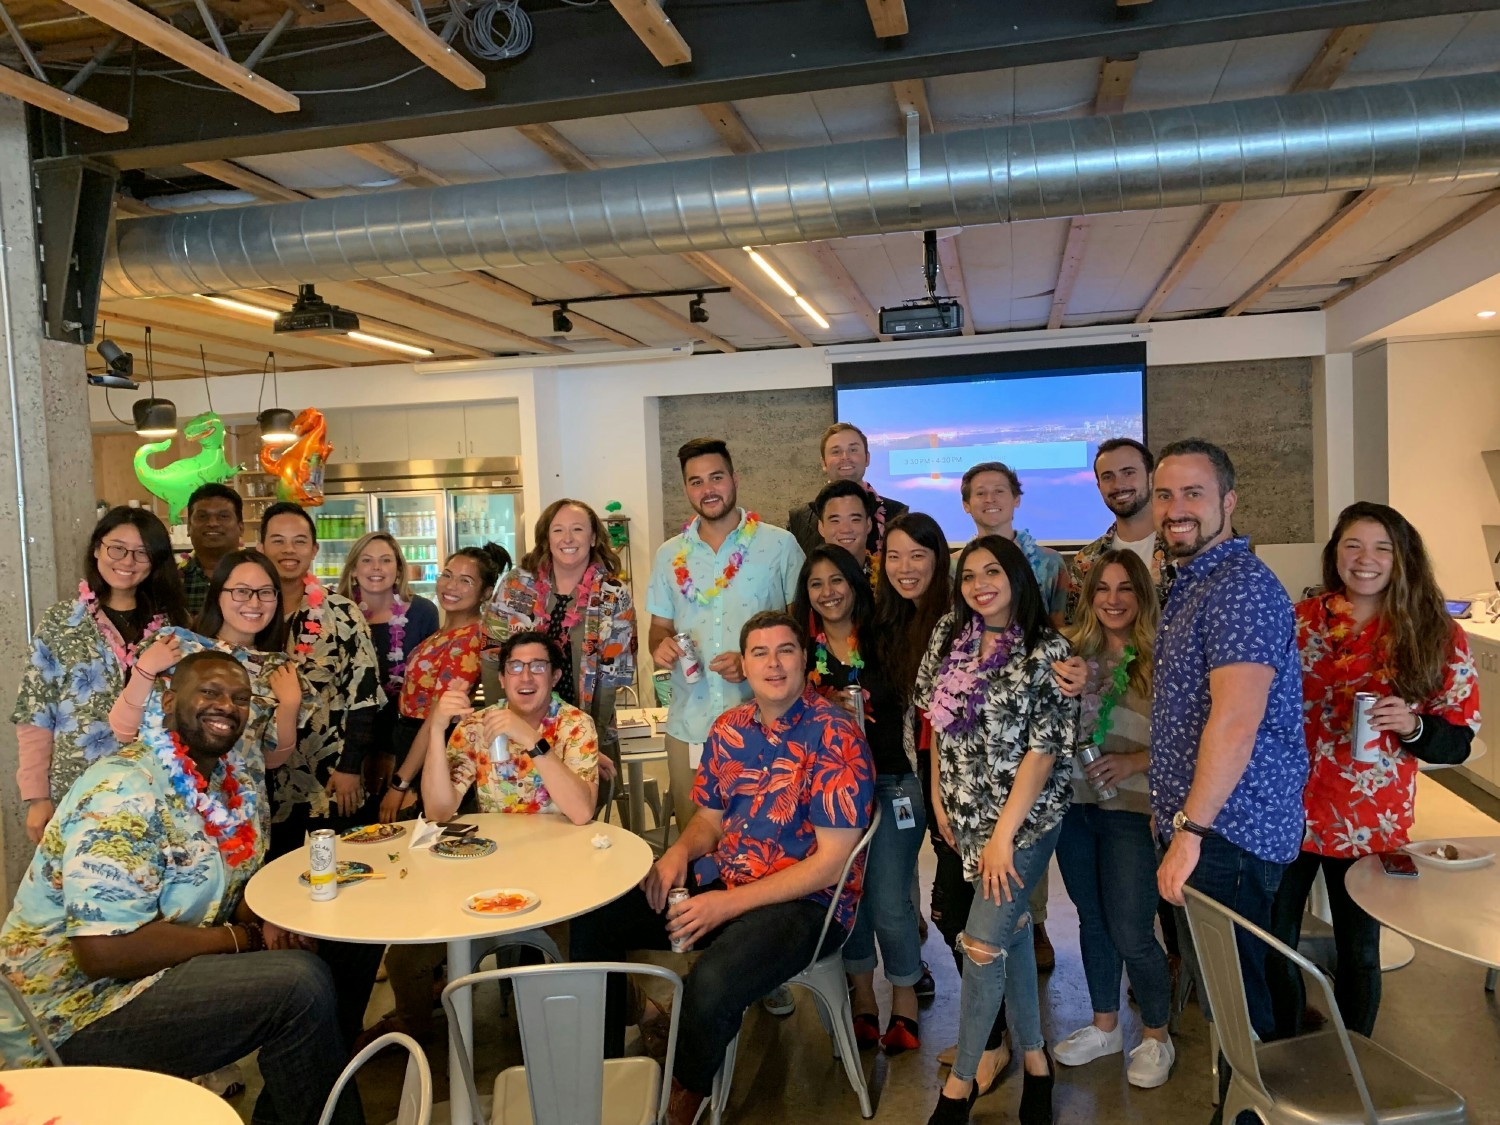 The Plastiq team knows how to have fun, celebrating diversity and Hawaiian shirt day!